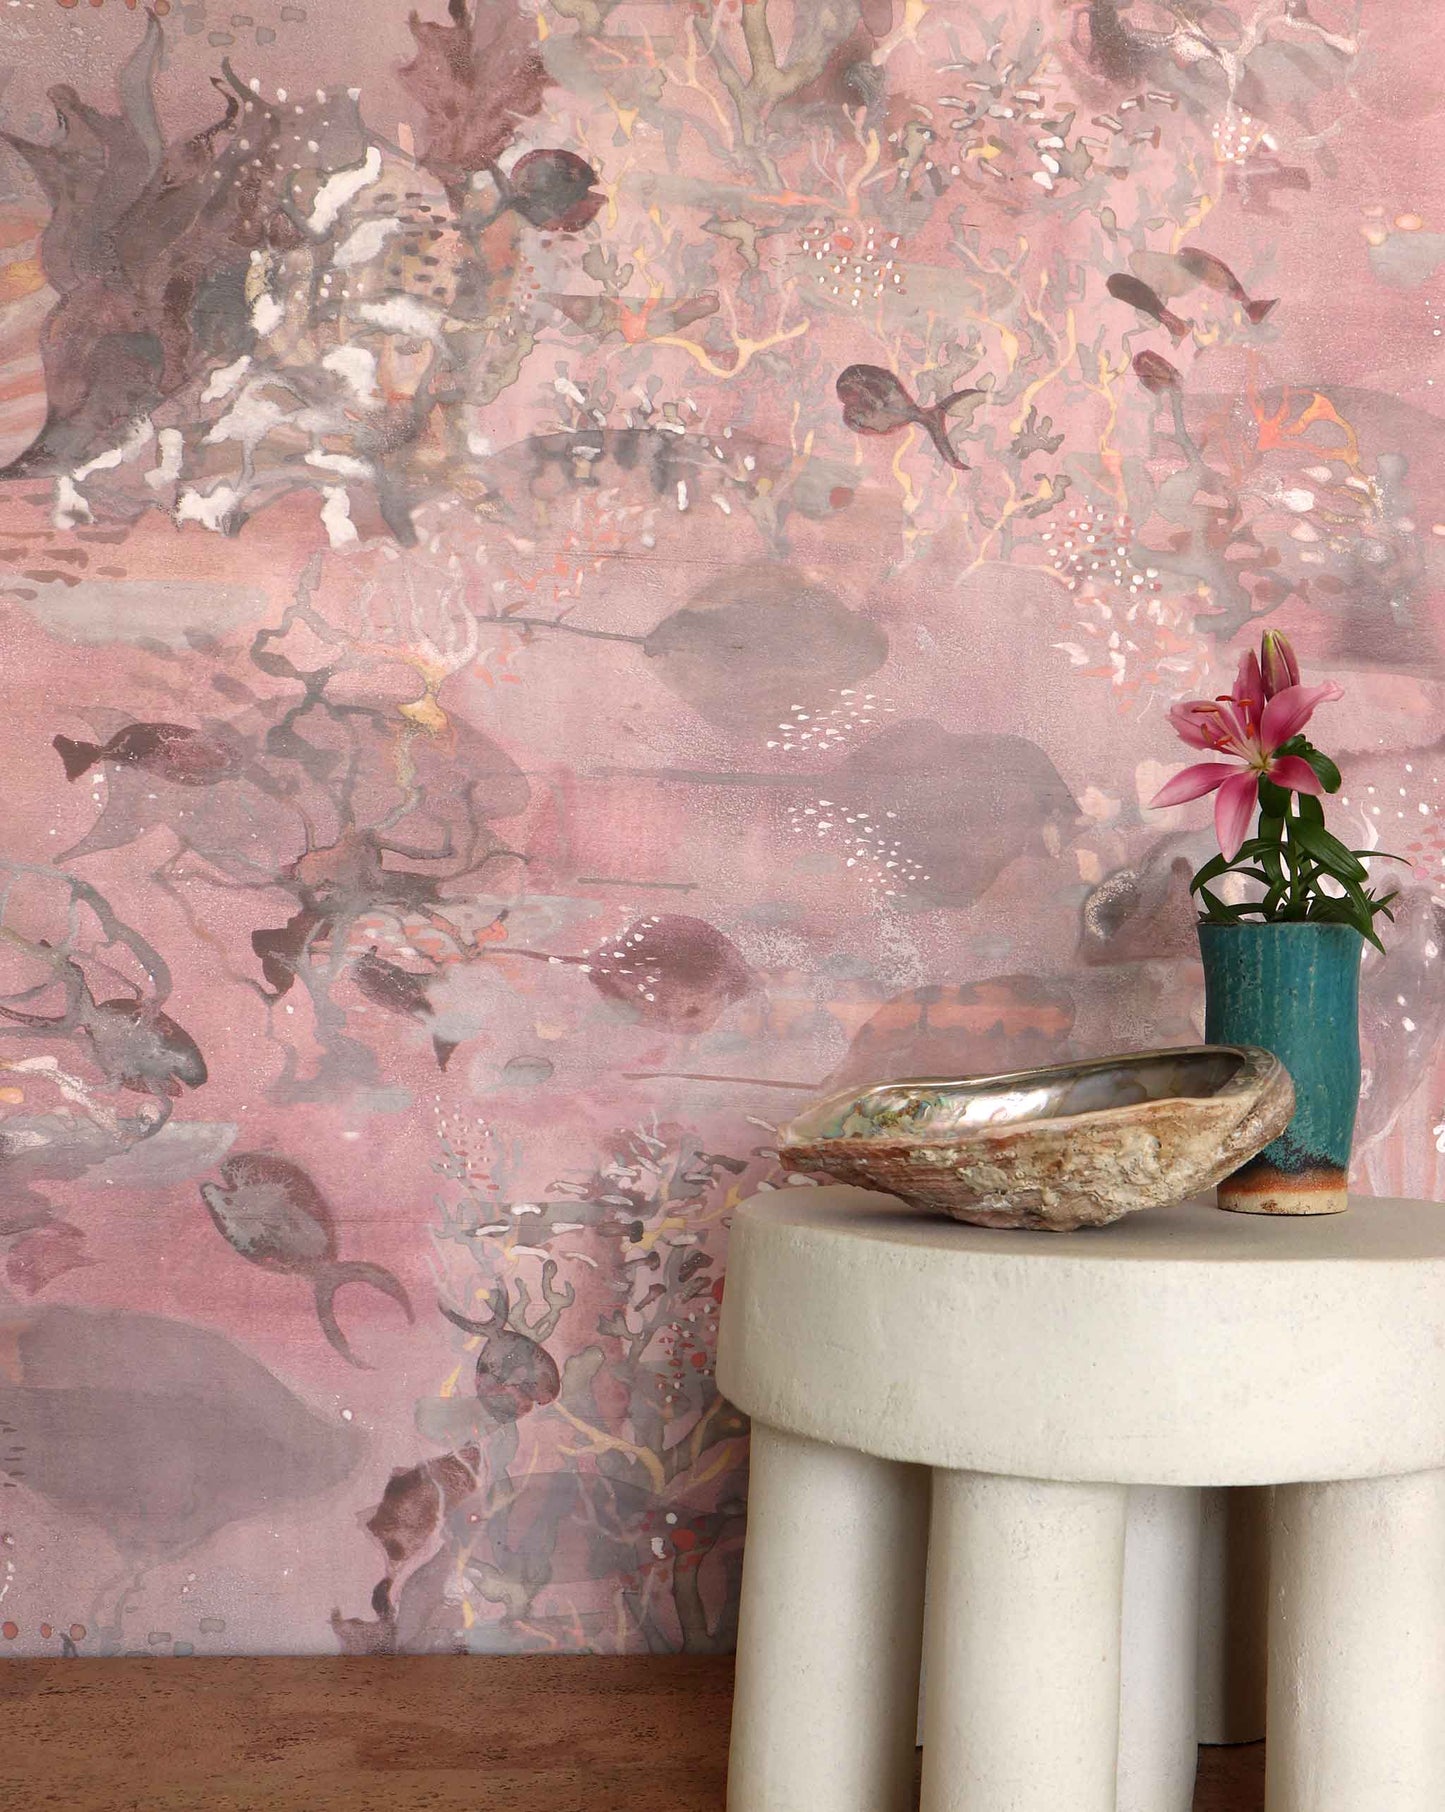 Eskayel’s Atoll wallpaper in Coral with its red hues is printed on a paper backed silk and installed in a room behind a stone stool.